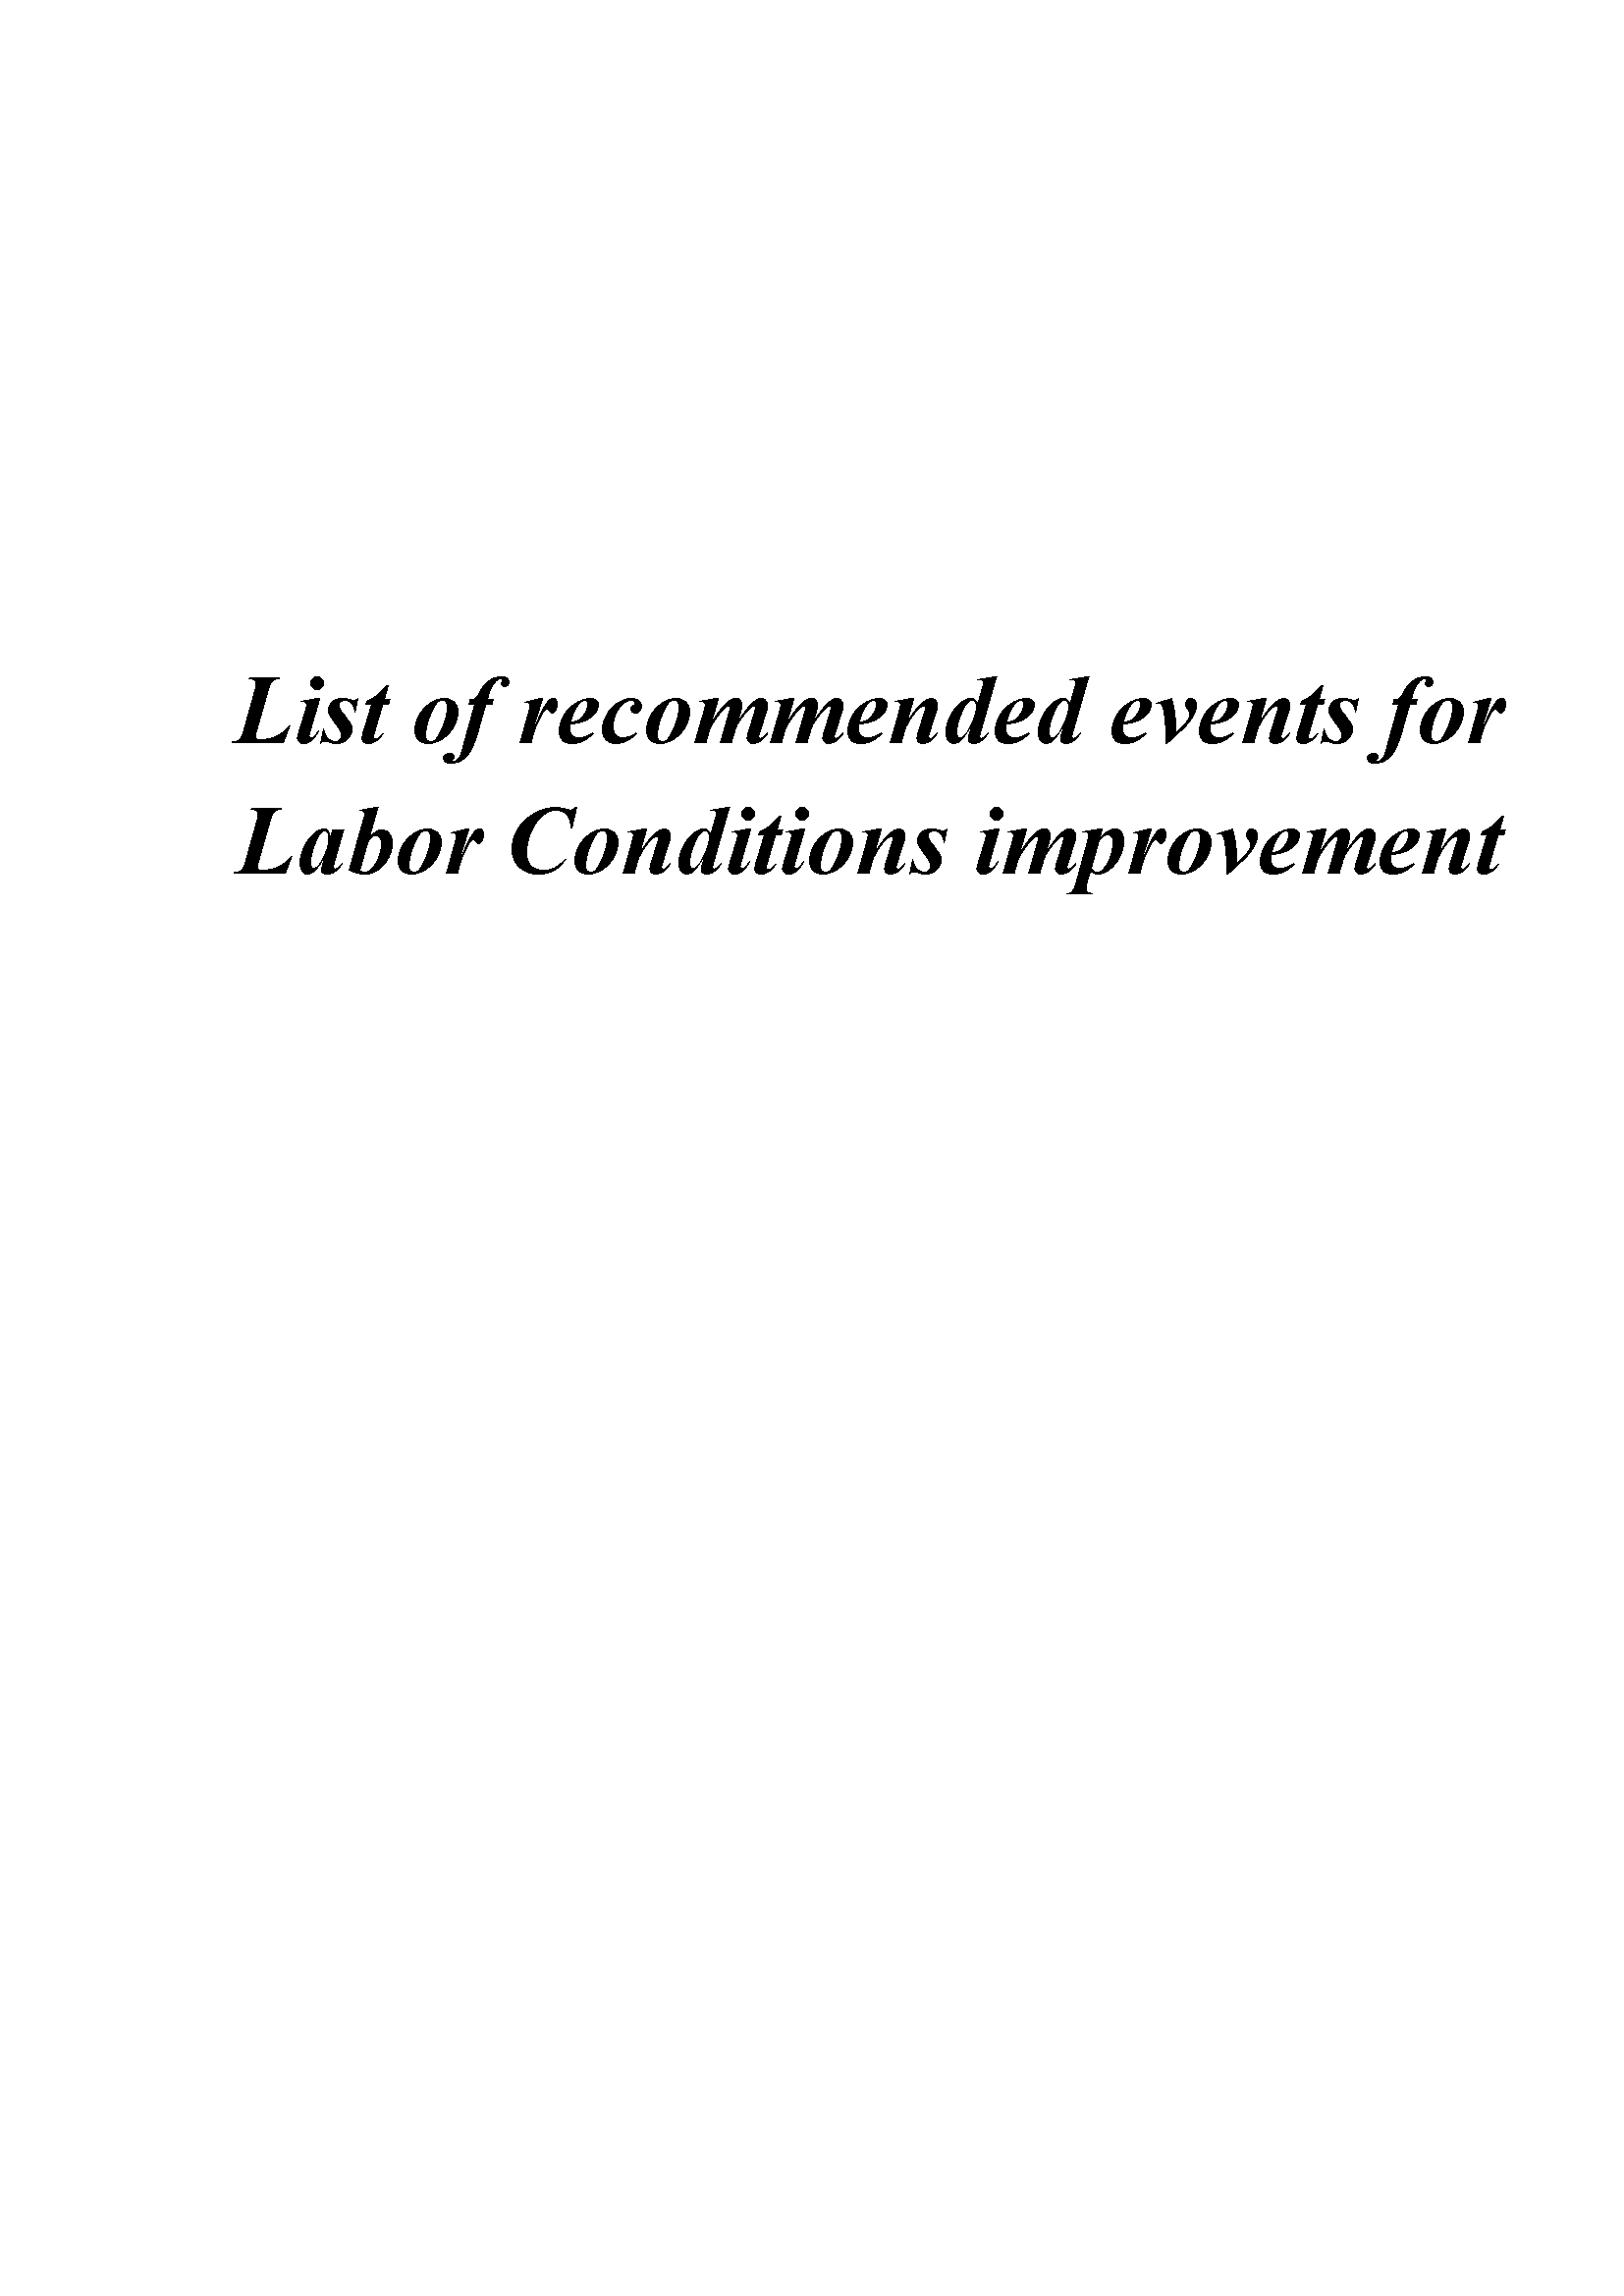 List of recommended events for Labor Conditions improvement